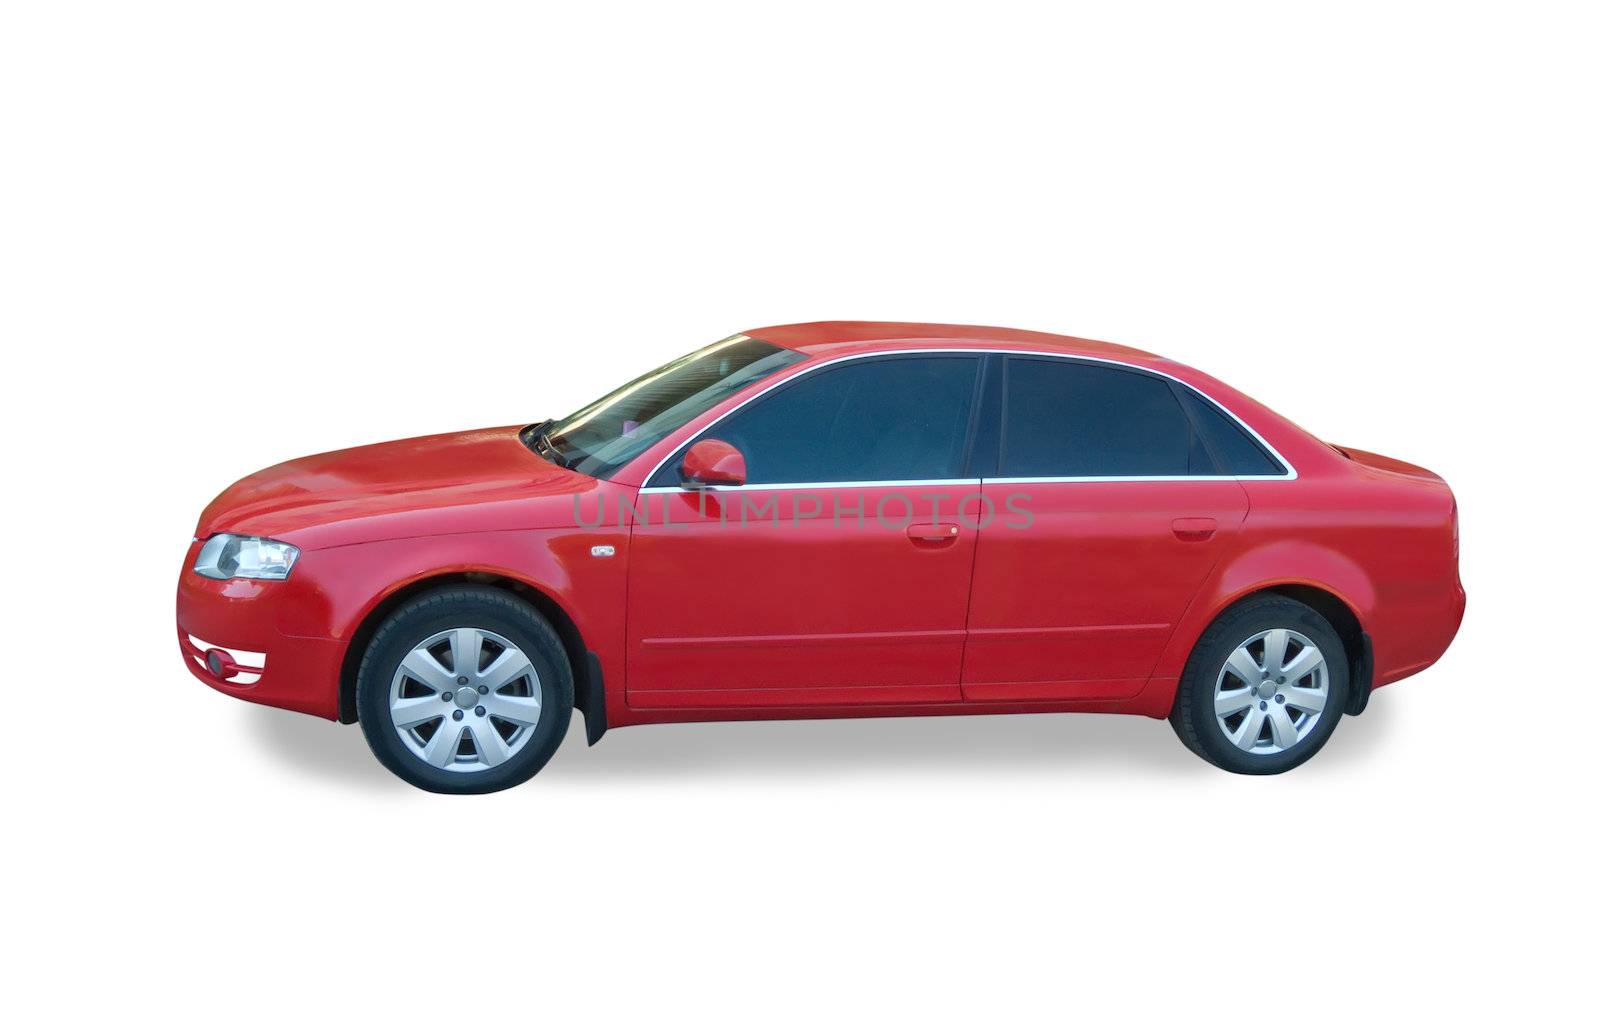 new red family car on white. Isolated whith clipping path